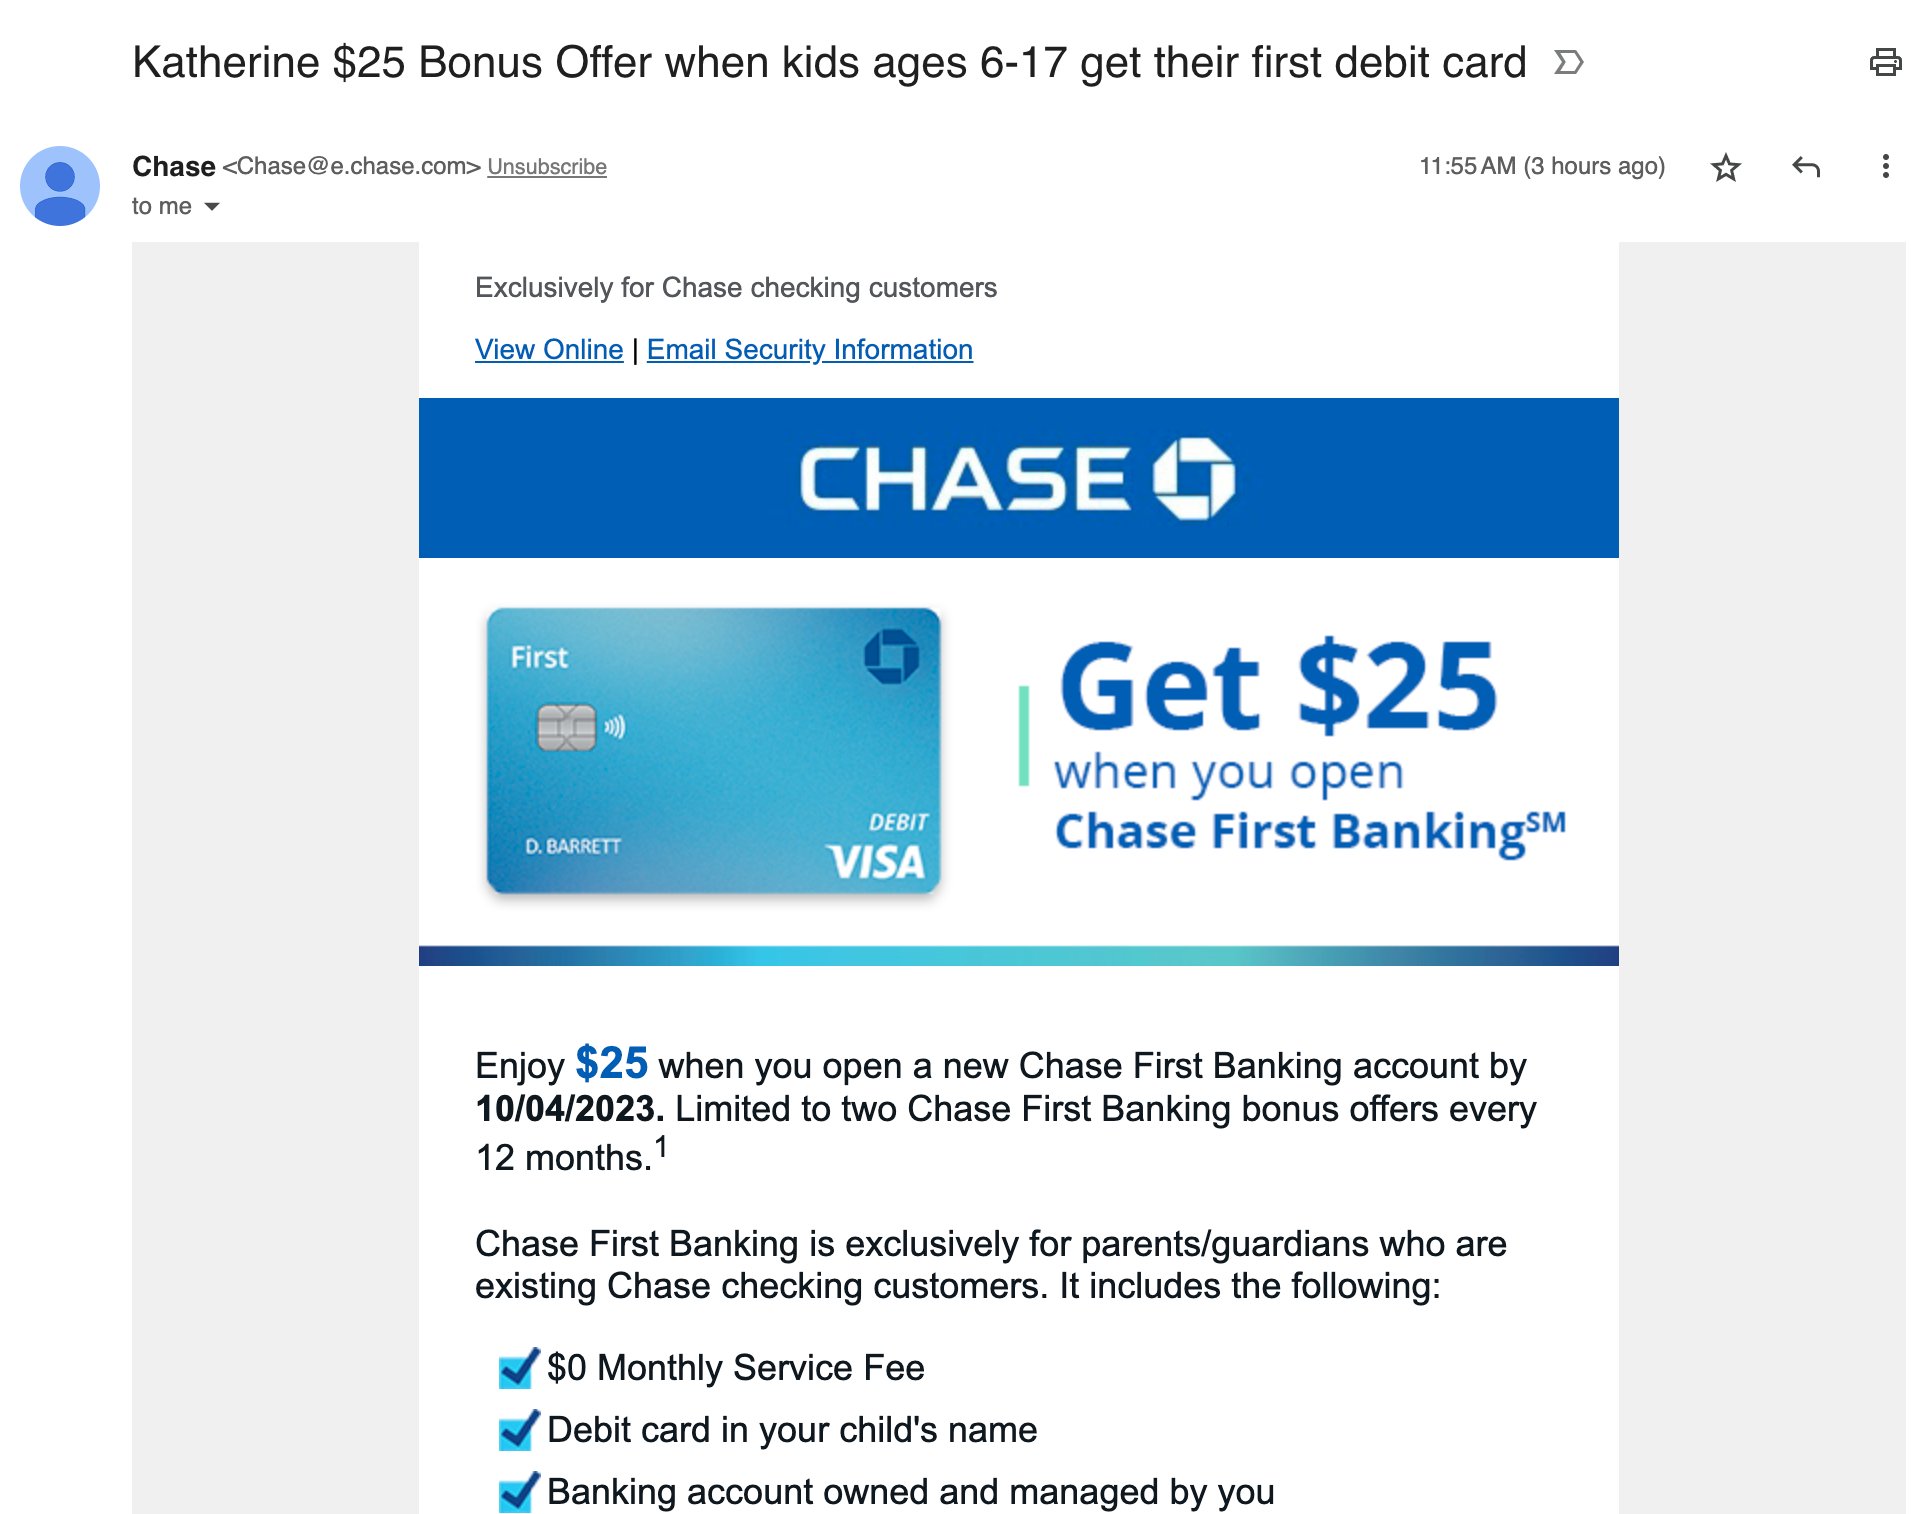 Chase email campaign